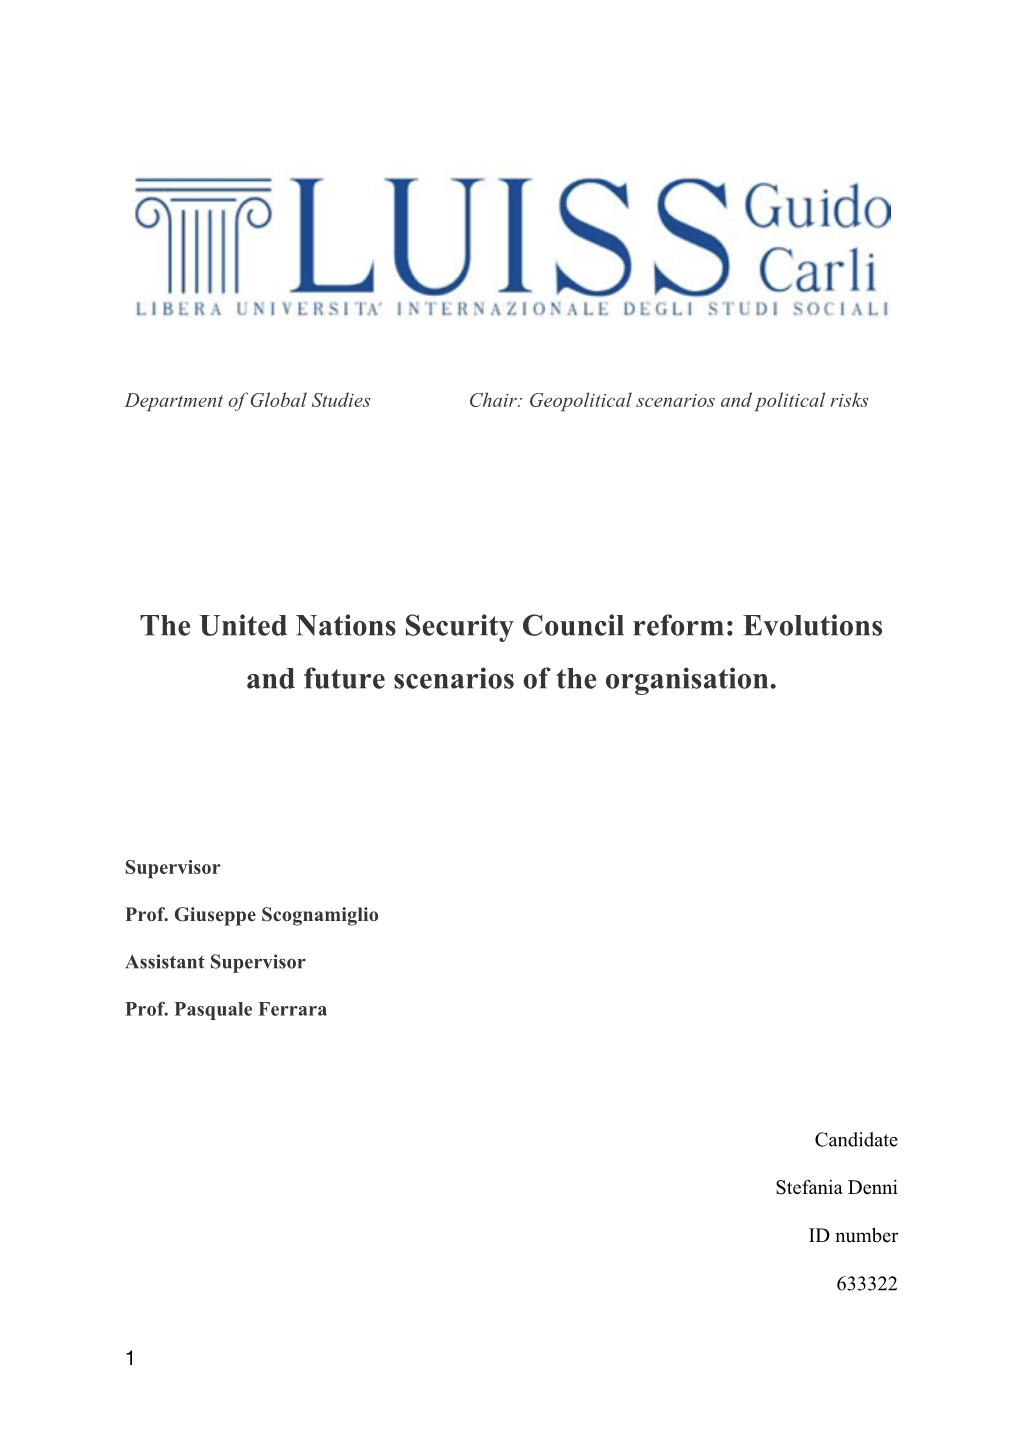 The United Nations Security Council Reform: Evolutions and Future Scenarios of the Organisation